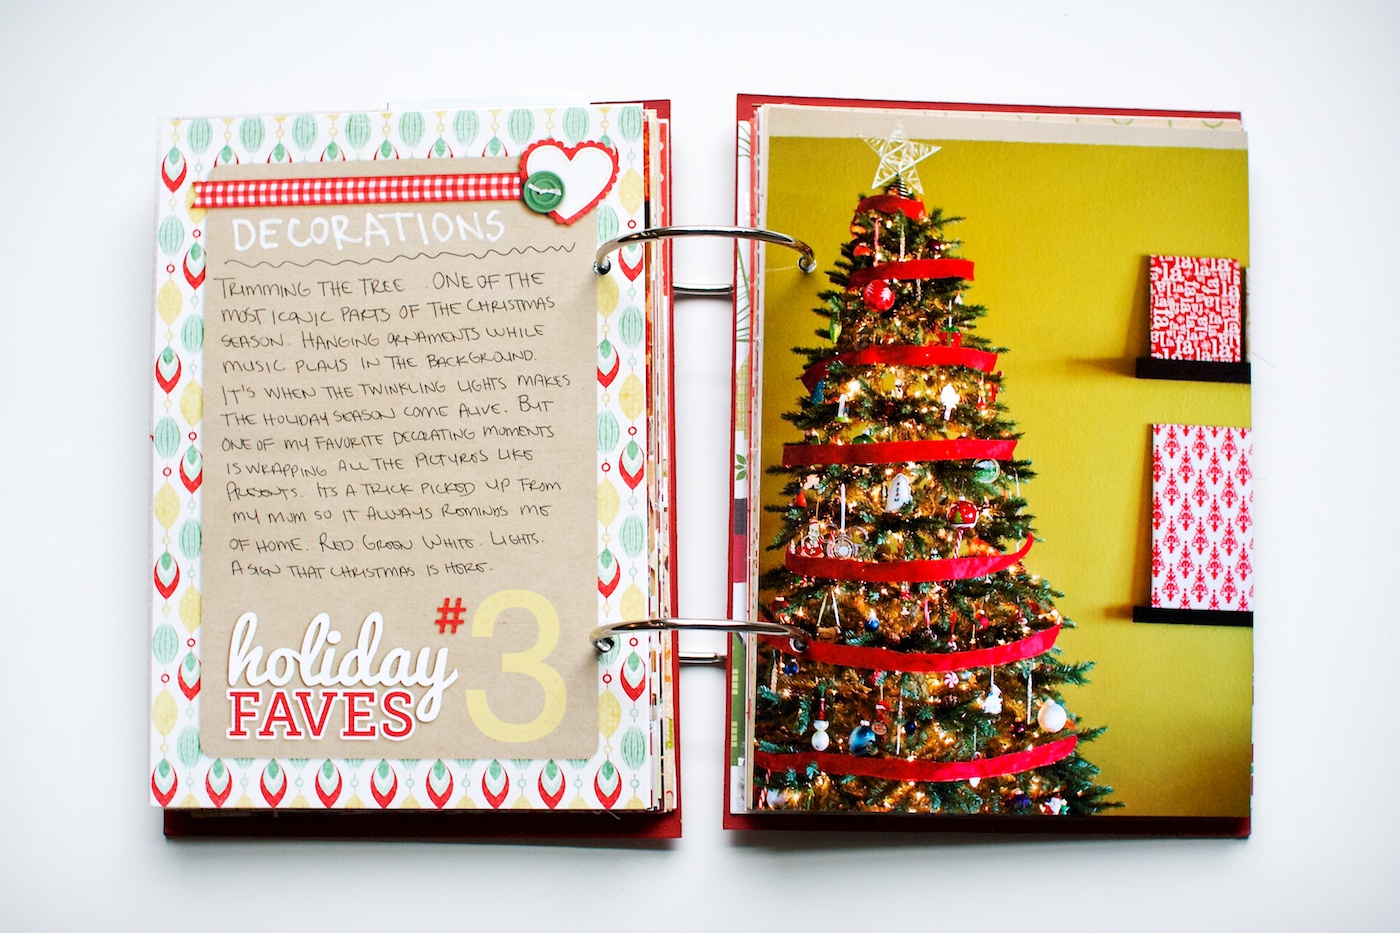 nettiodesigns_Holiday-Faves-2014-Story3